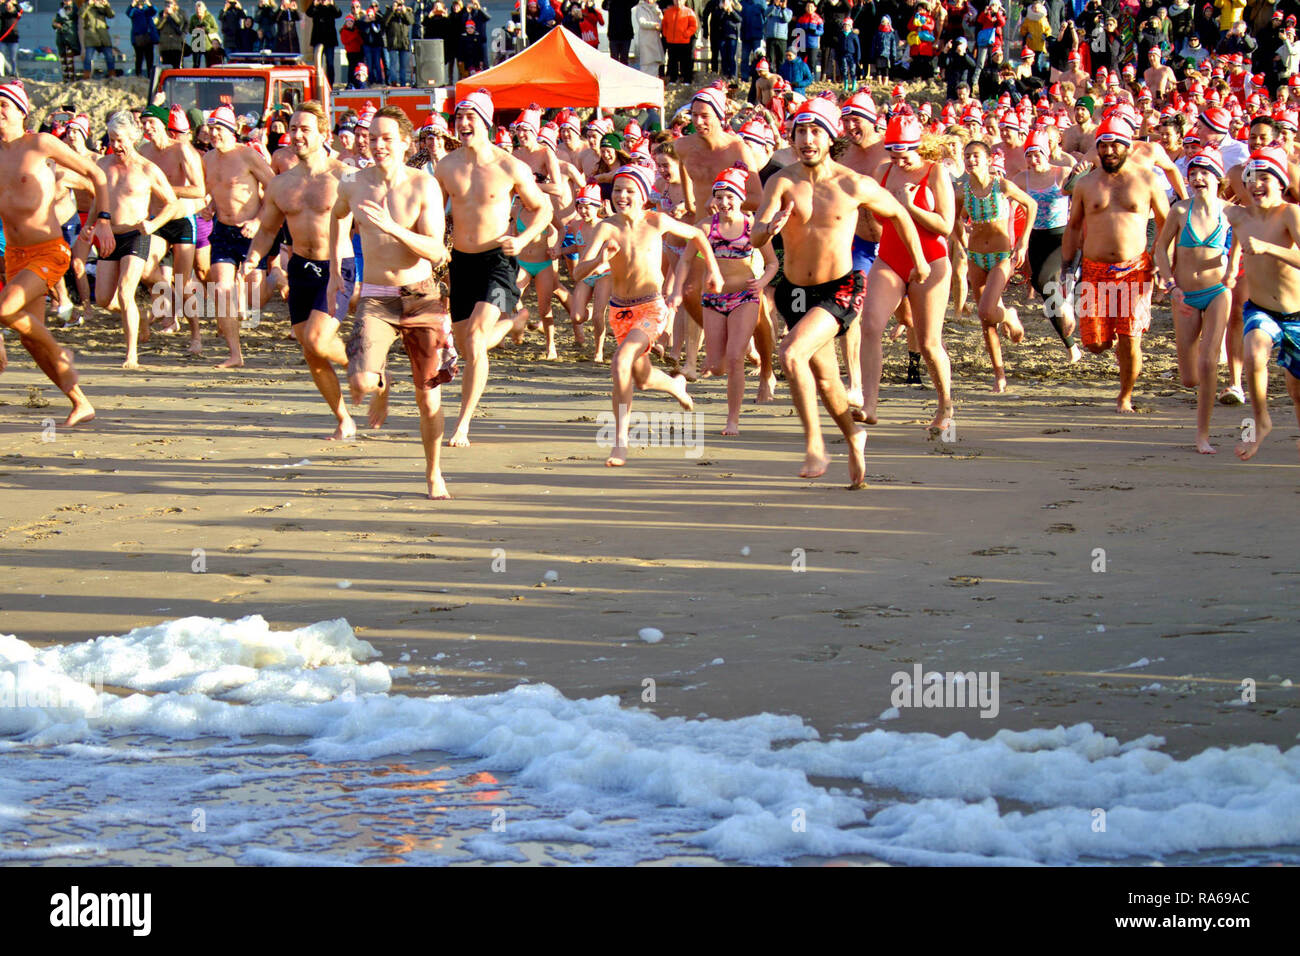 Bloemendaal Aan Zee, The Netherlands. 1st Jan, 2019. People swarm into the sea during a traditional New Year's Dip event to celebrate the beginning of the New Year in Bloemendaal aan Zee, the Netherlands, on Jan. 1, 2019. Credit: Sylvia Lederer/Xinhua/Alamy Live News Stock Photo